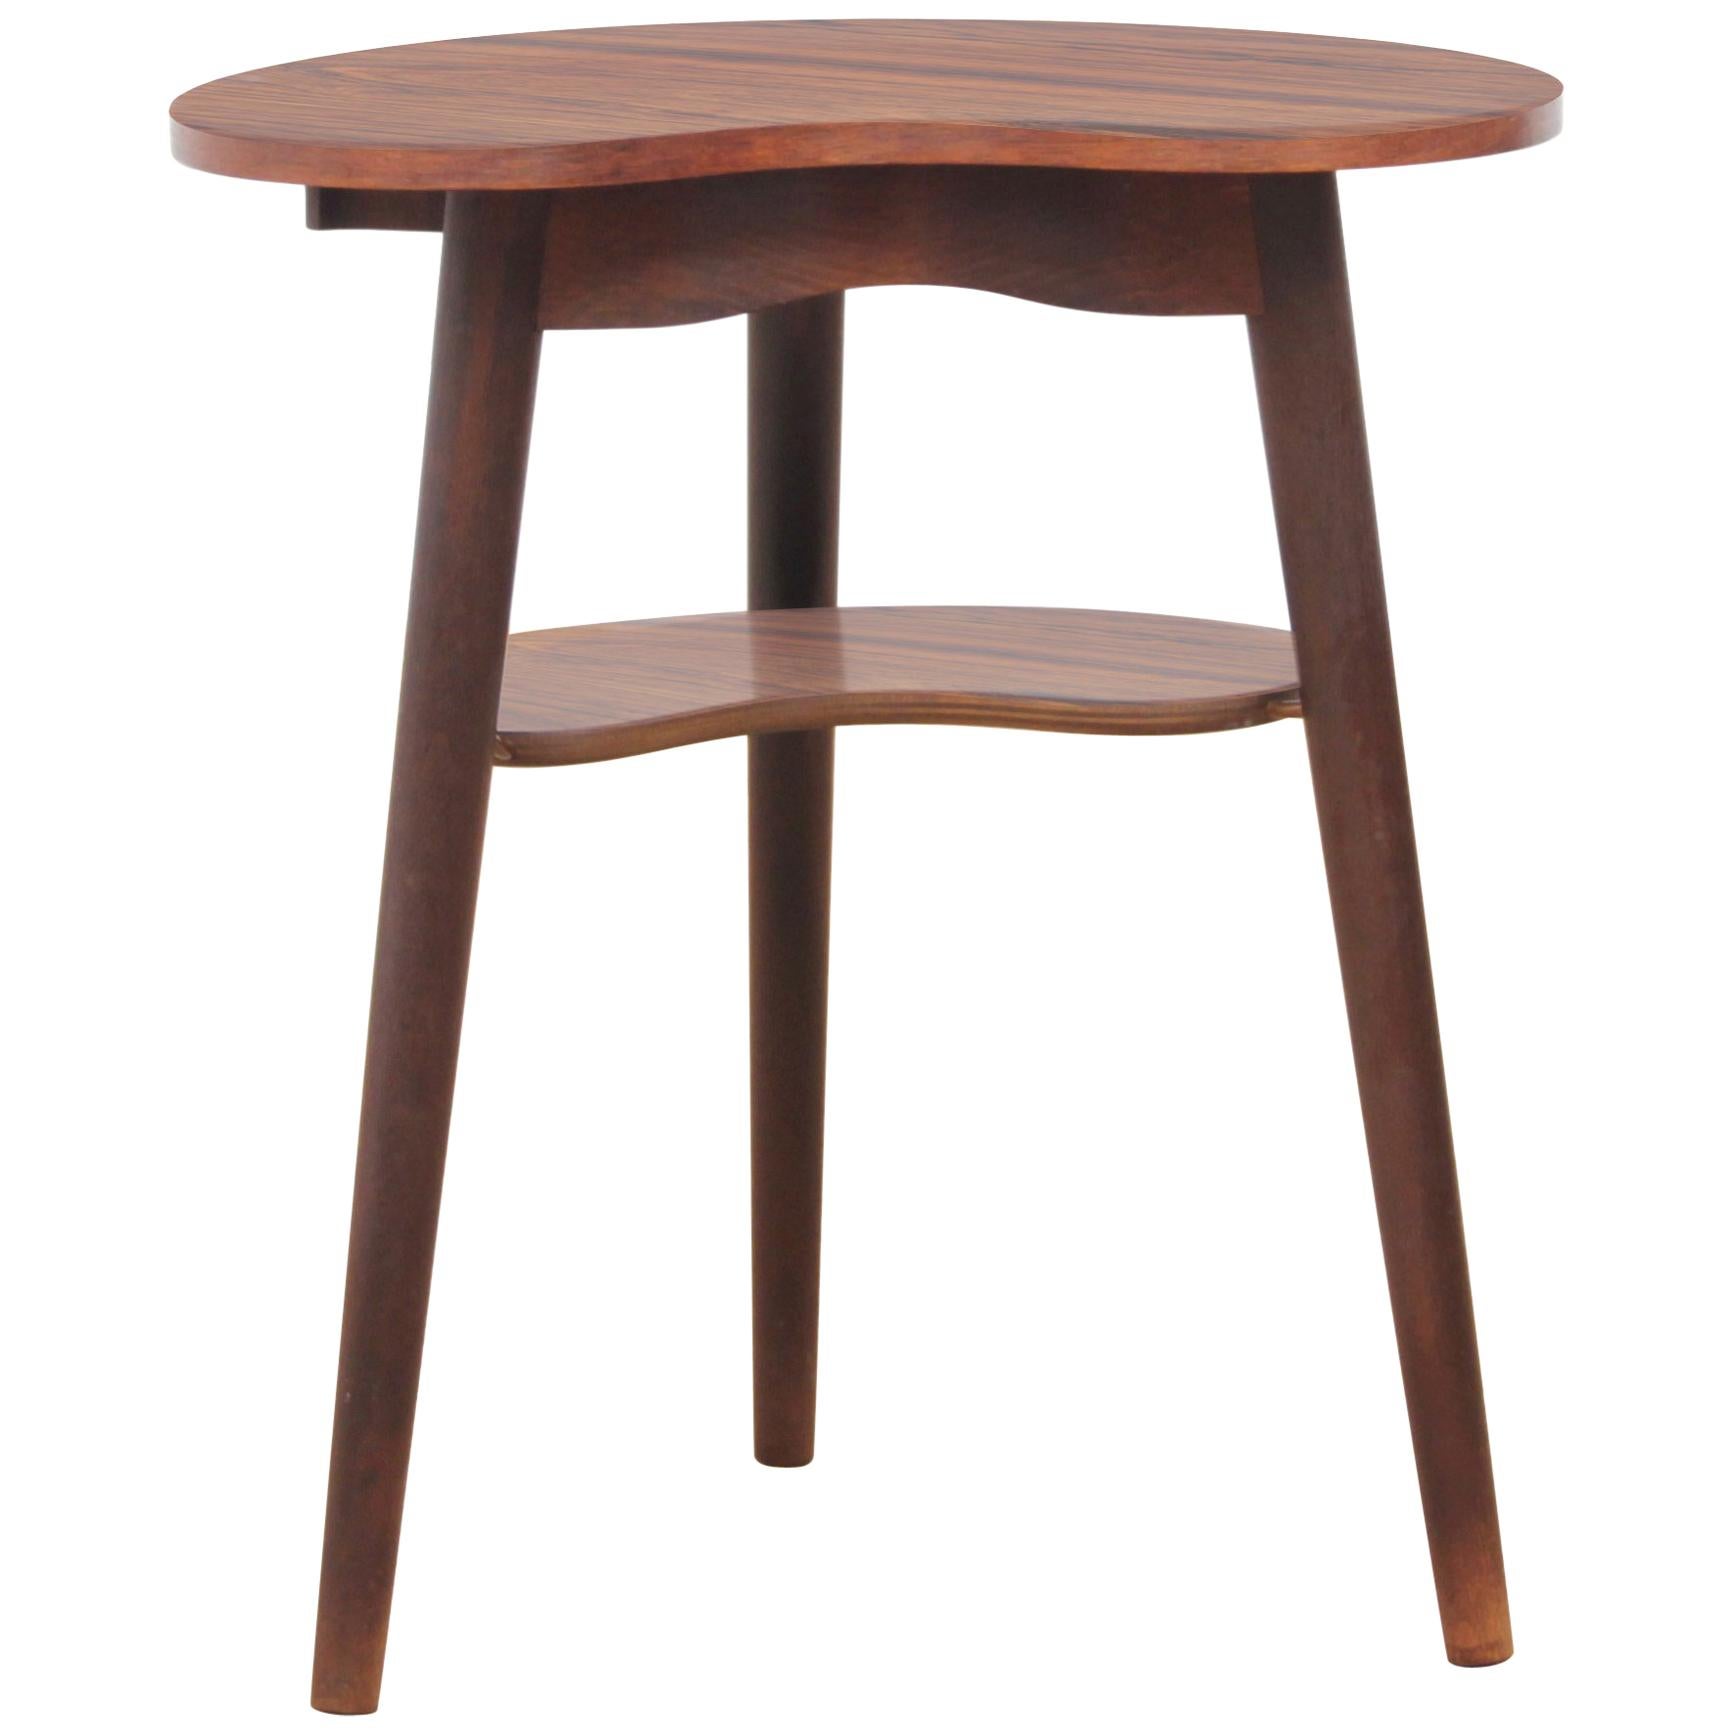 Mid-Century Modern Scandinavian Occasional Table in Rosewood